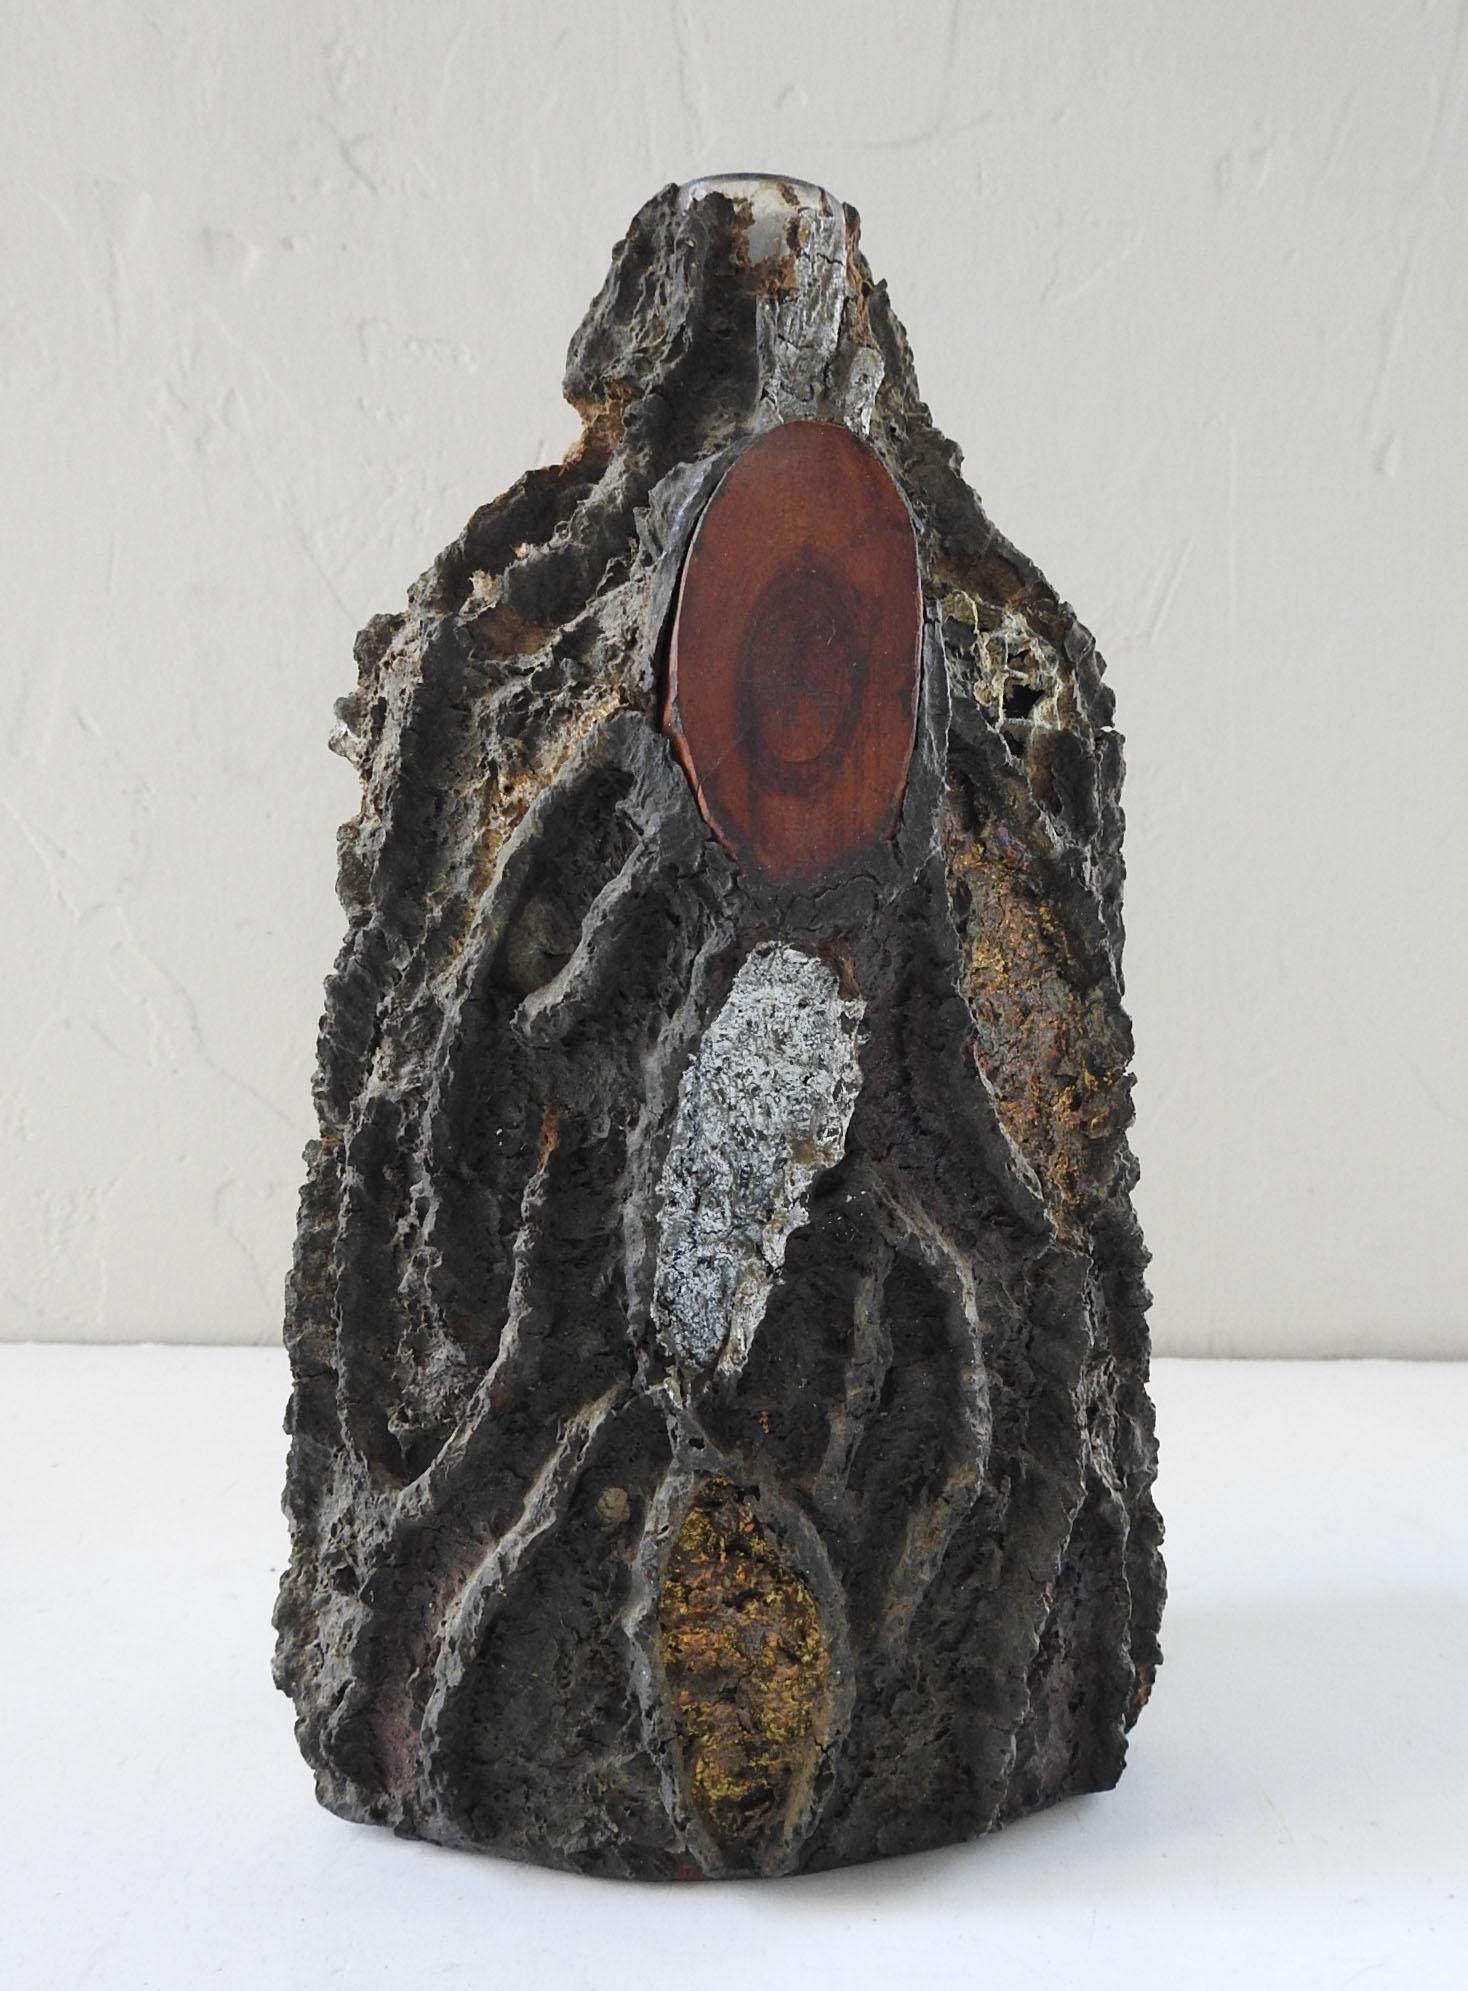 Vintage bottle covered in wood and textured putty to resemble bark.  Wire mesh with wood pieces and shaped putty in dark brown over bottle,  accented with silver and gold paint.  Overall crazing, some losses.